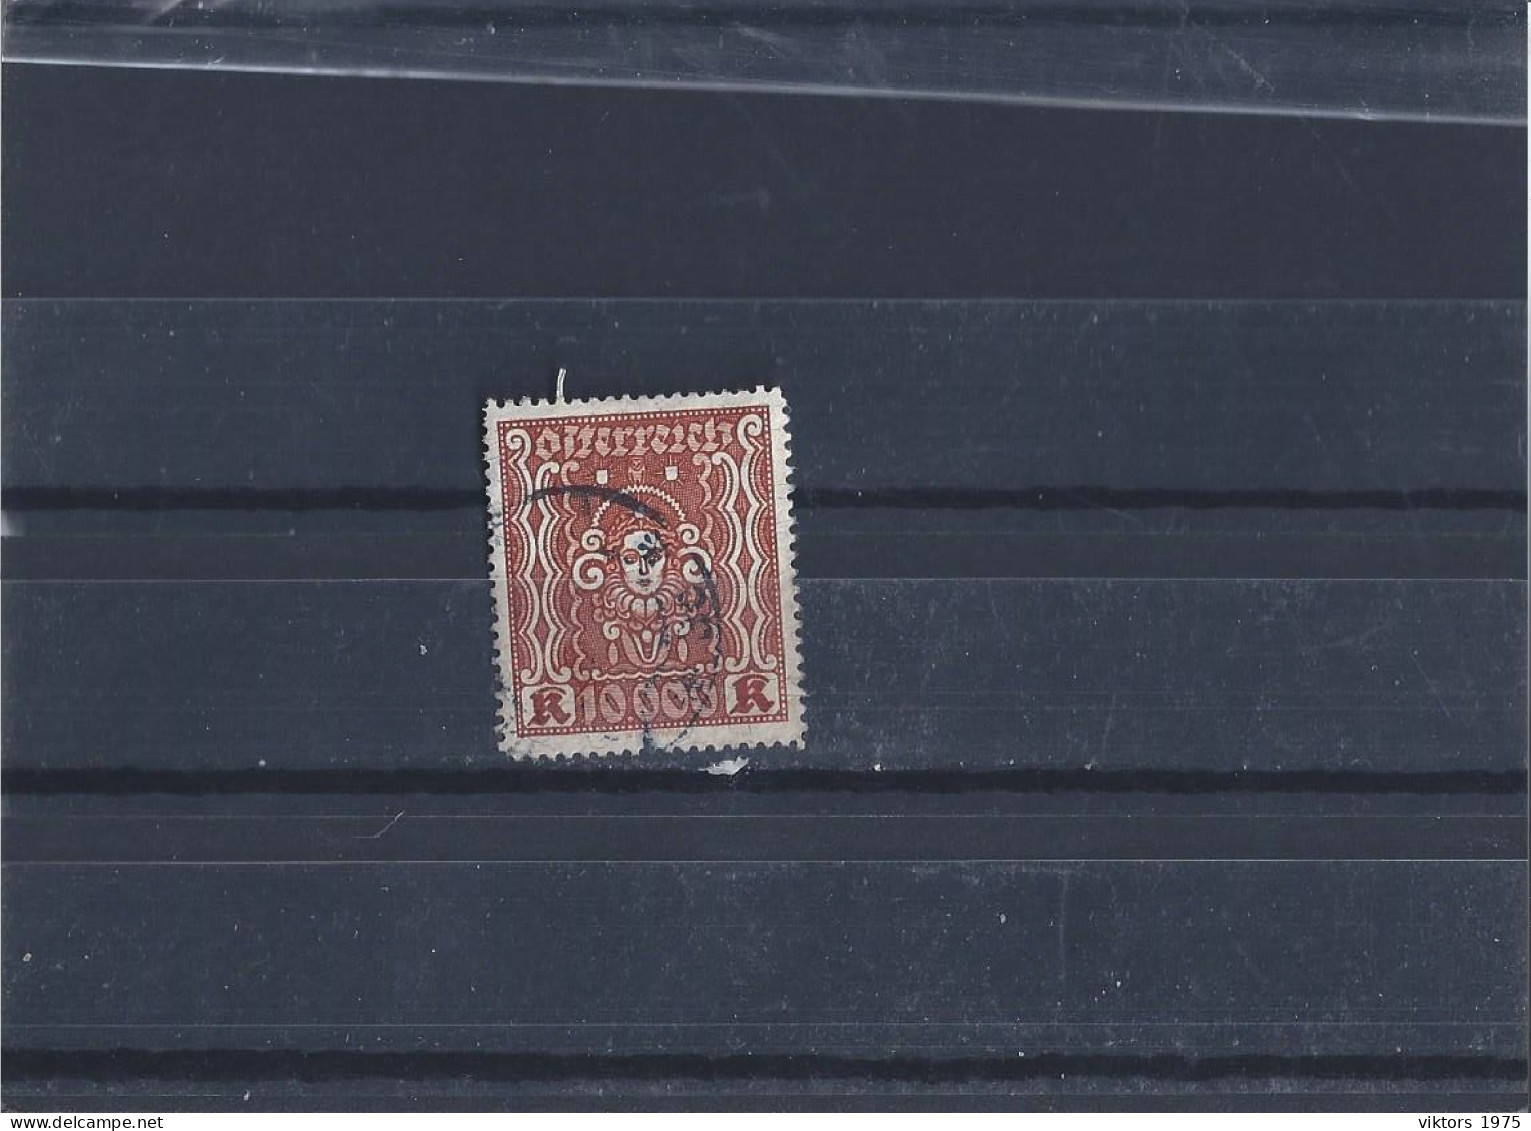 Used Stamp Nr.408 In MICHEL Catalog - Used Stamps